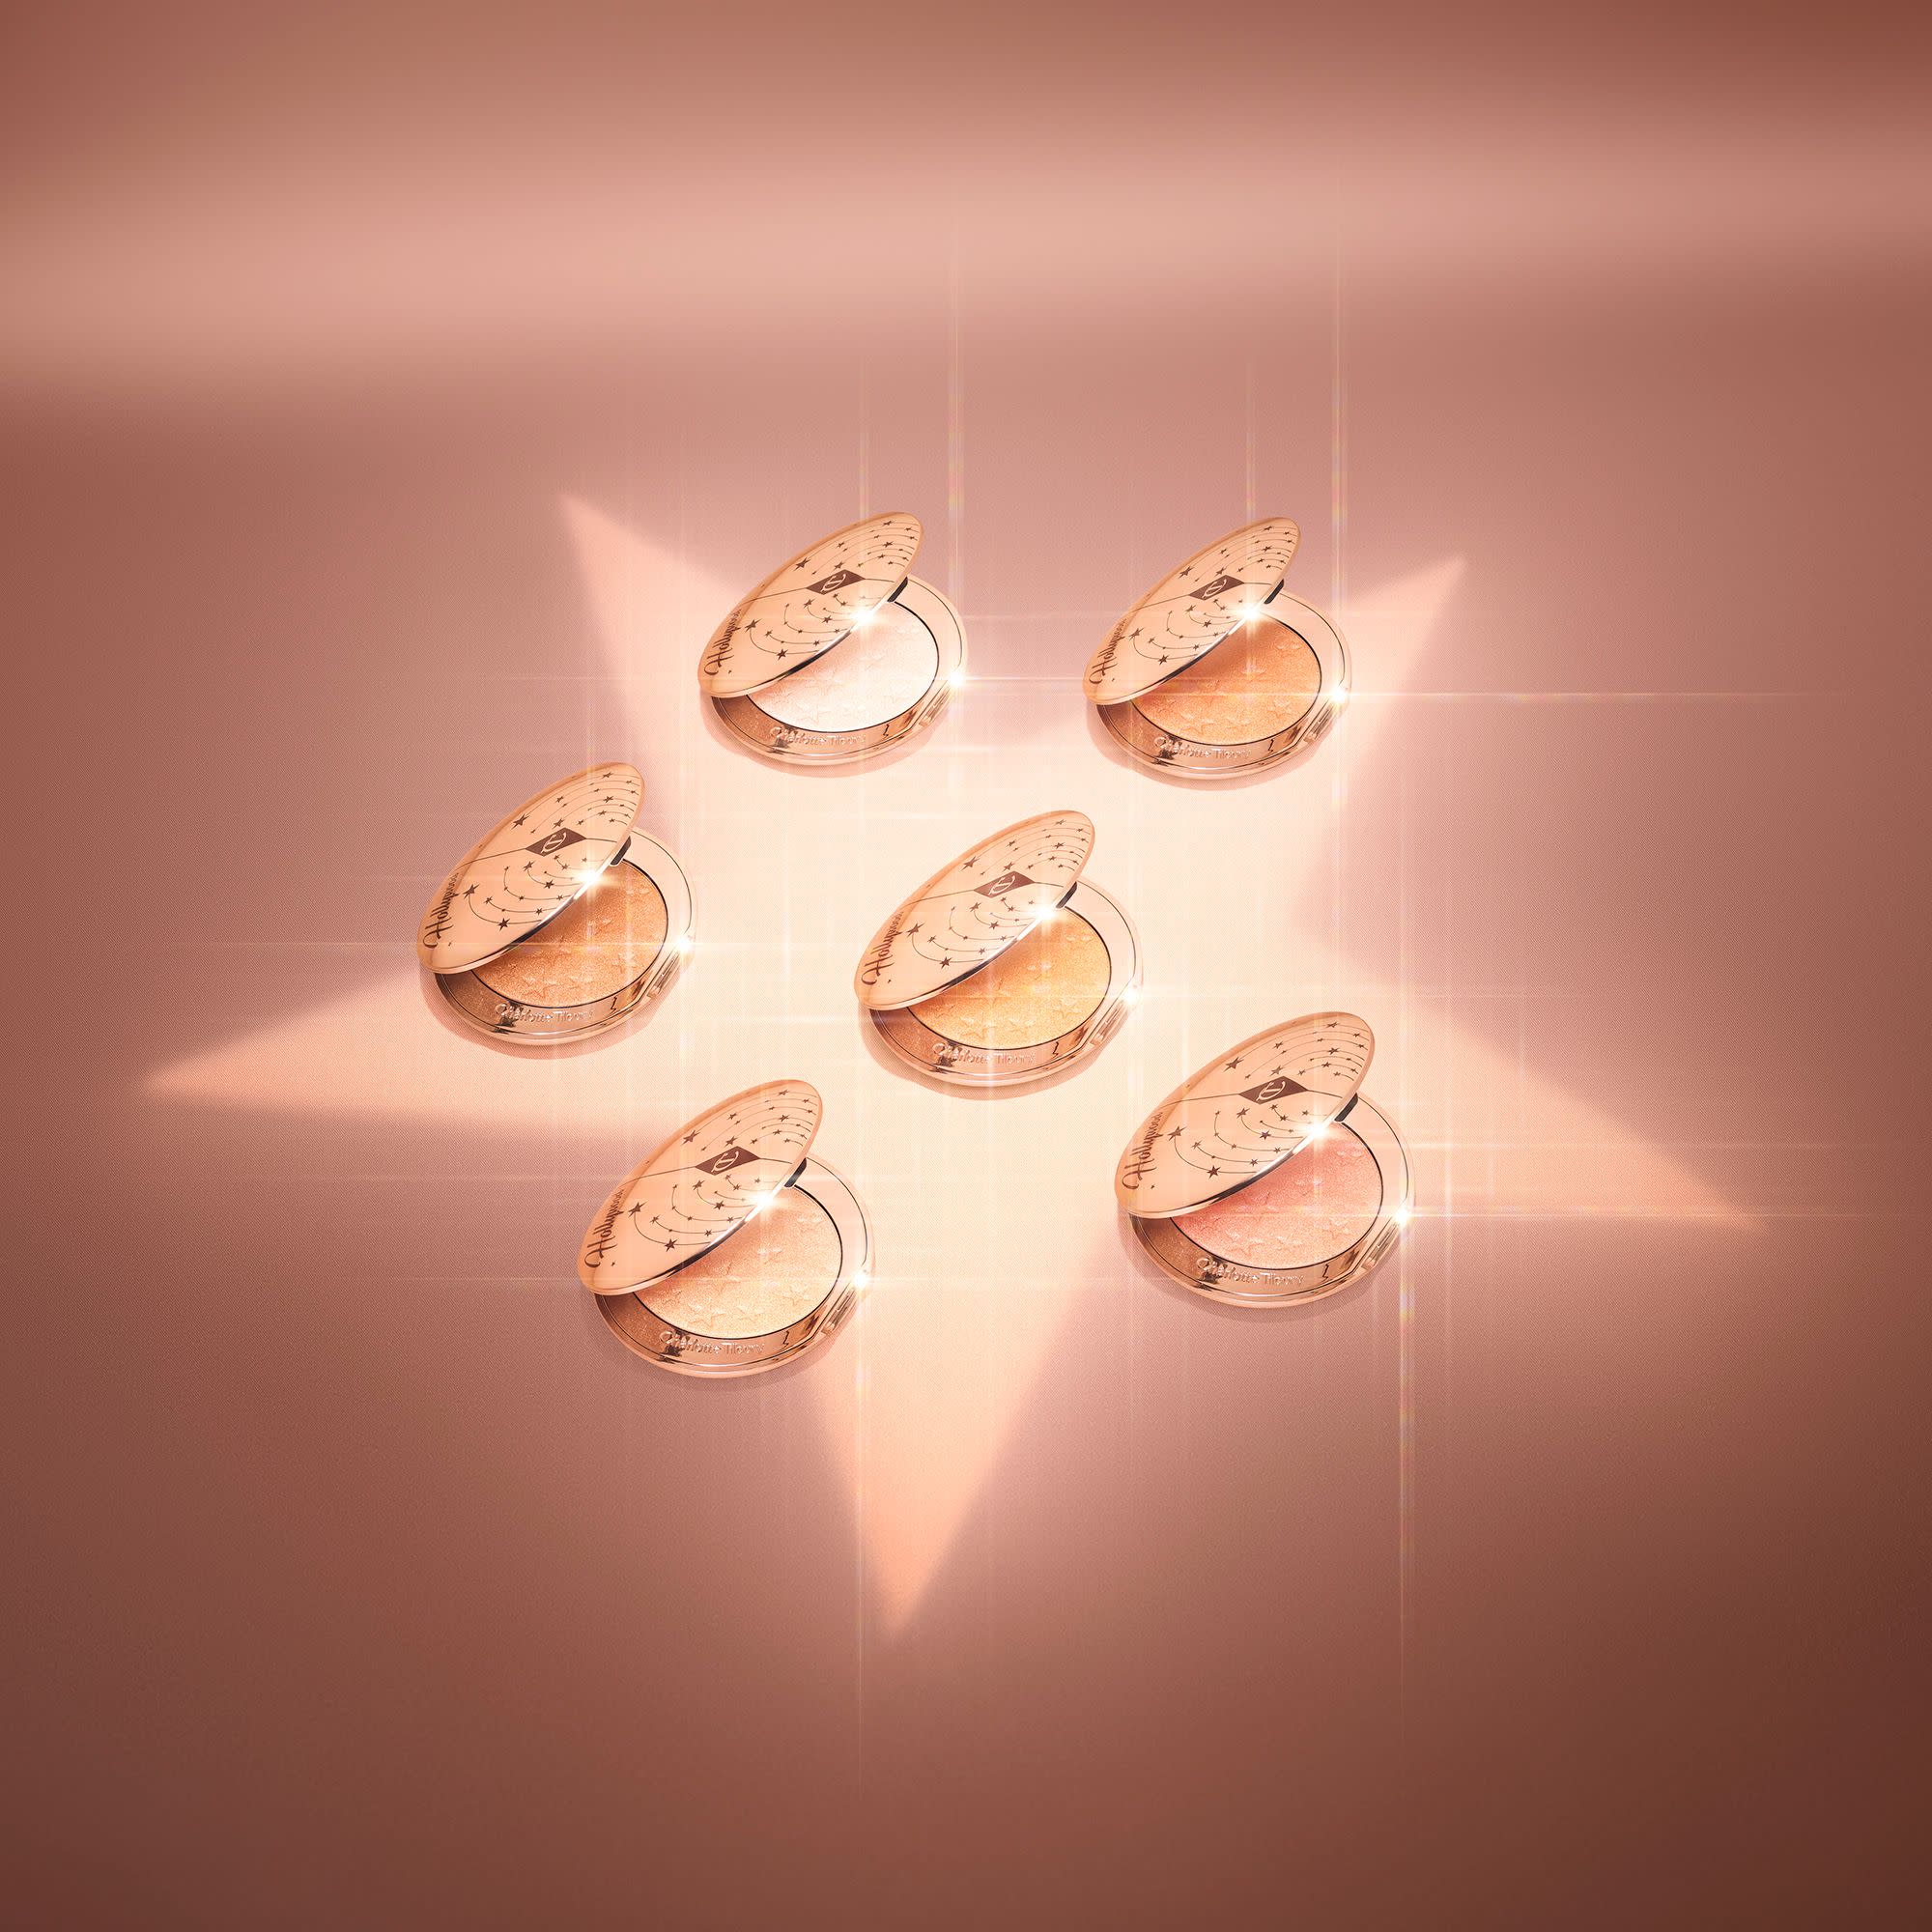 6 shades of Charlotte's Hollywood Glow Glide Face Architect Highlighters in a star formation